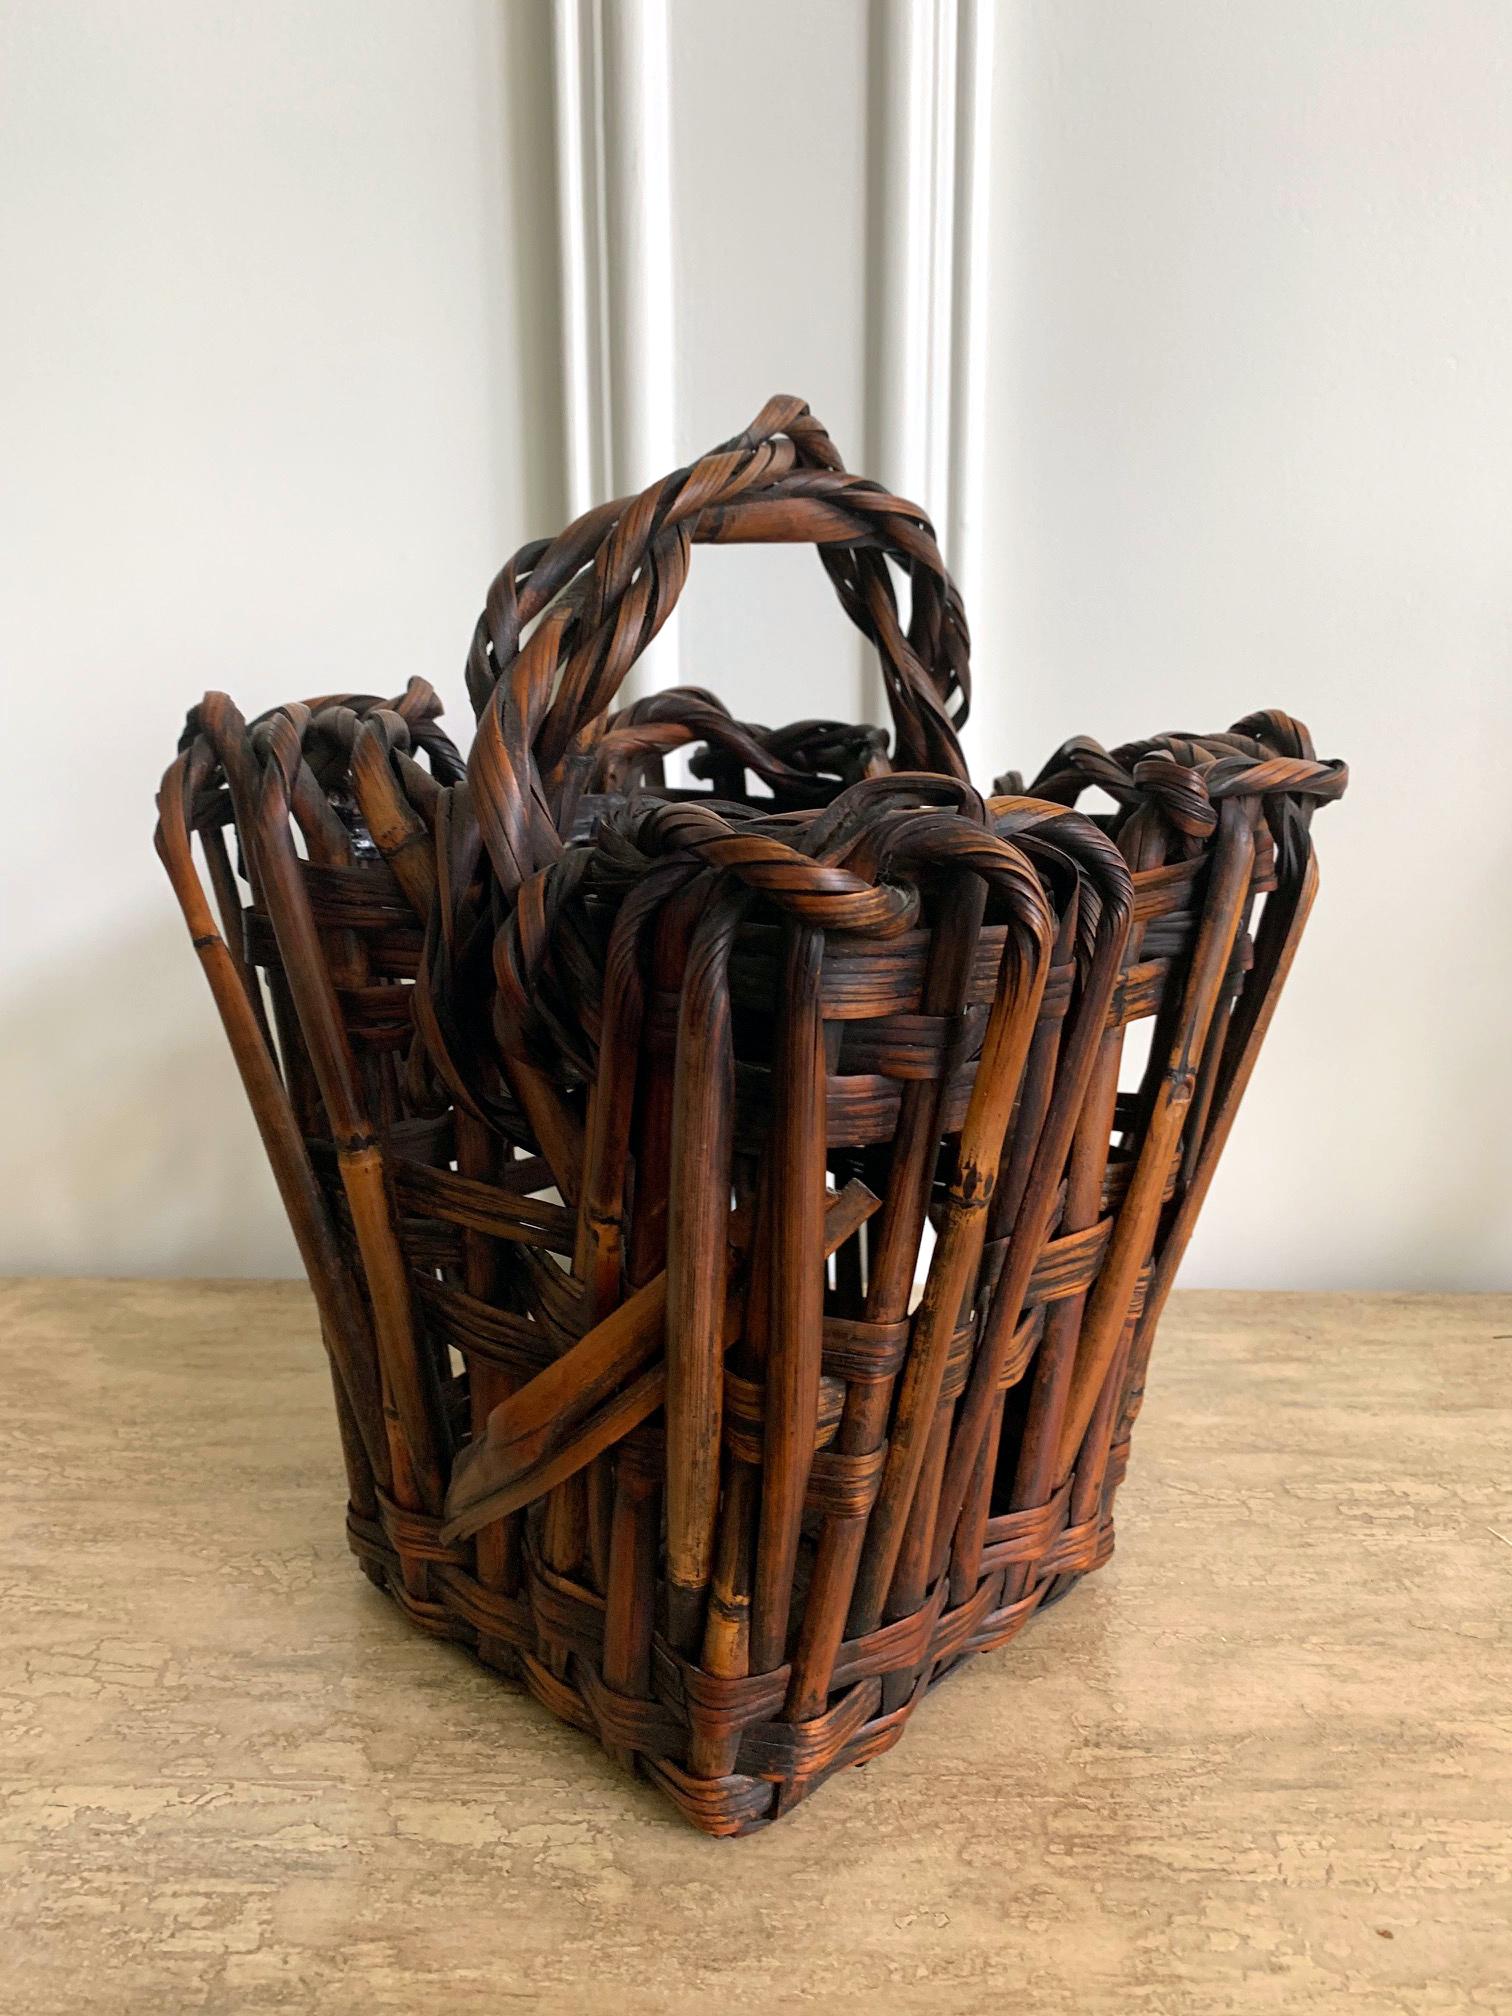 A lovely antique Japanese Ikebana basket in a tapered square barrel shape with double handles. Made from smoked bamboo and rattan strips. Constructed with a loose parallel and irregular weaving, the more linear body rises to a freer form using bent